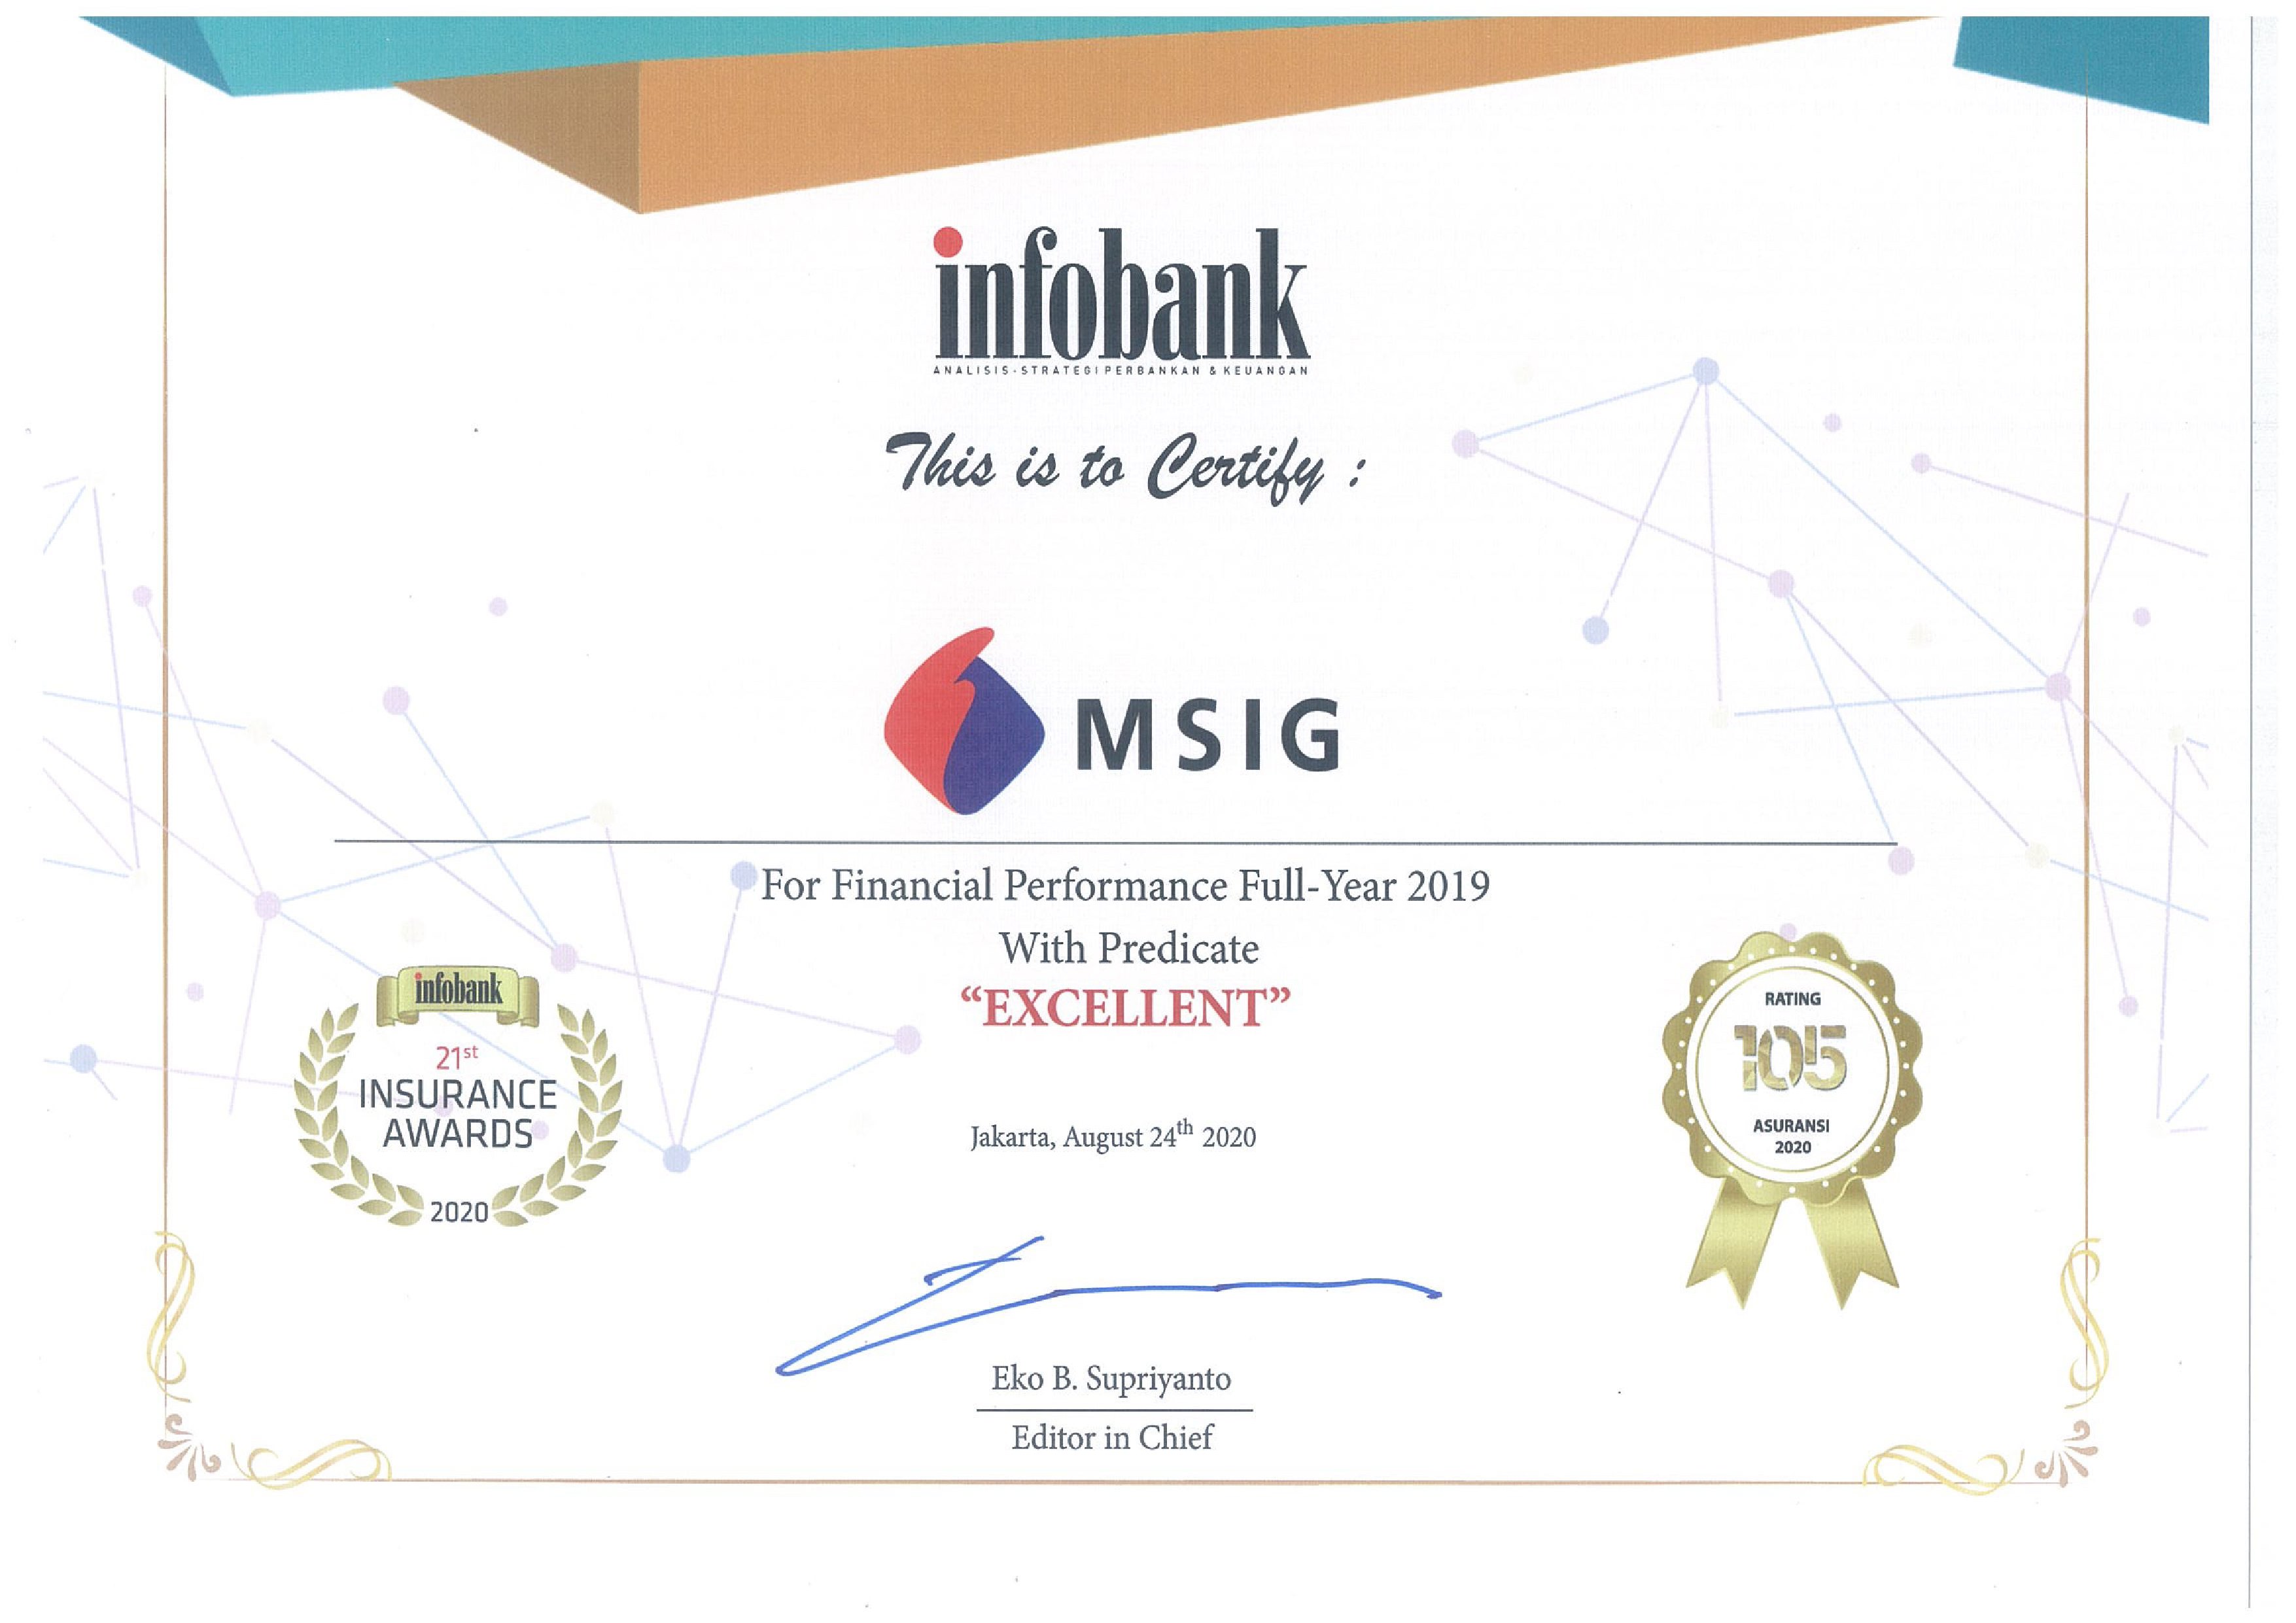 MSIG Indonesia Received a “Very Good” Award in General Insurance Category  